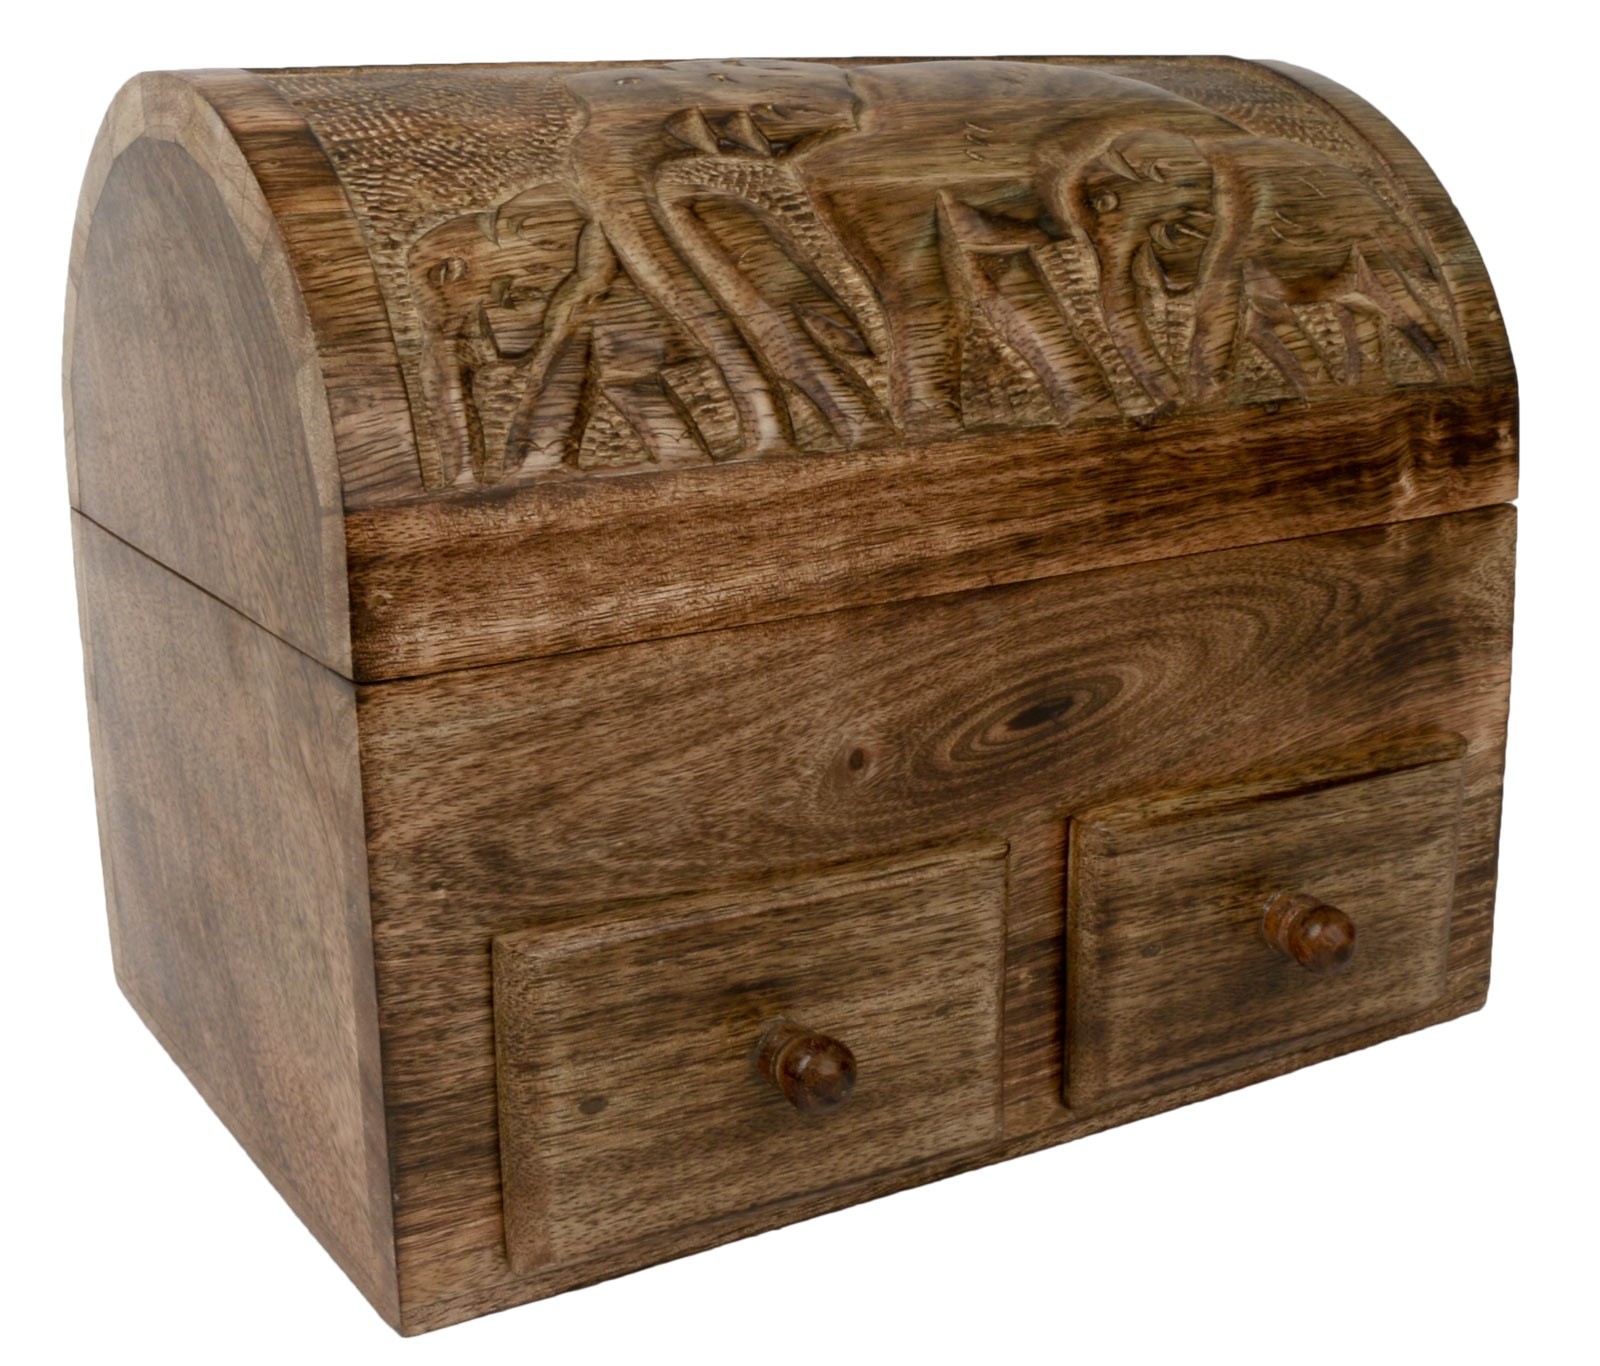 Mango Wood Elephant Dome Top Box With 2 Drawers